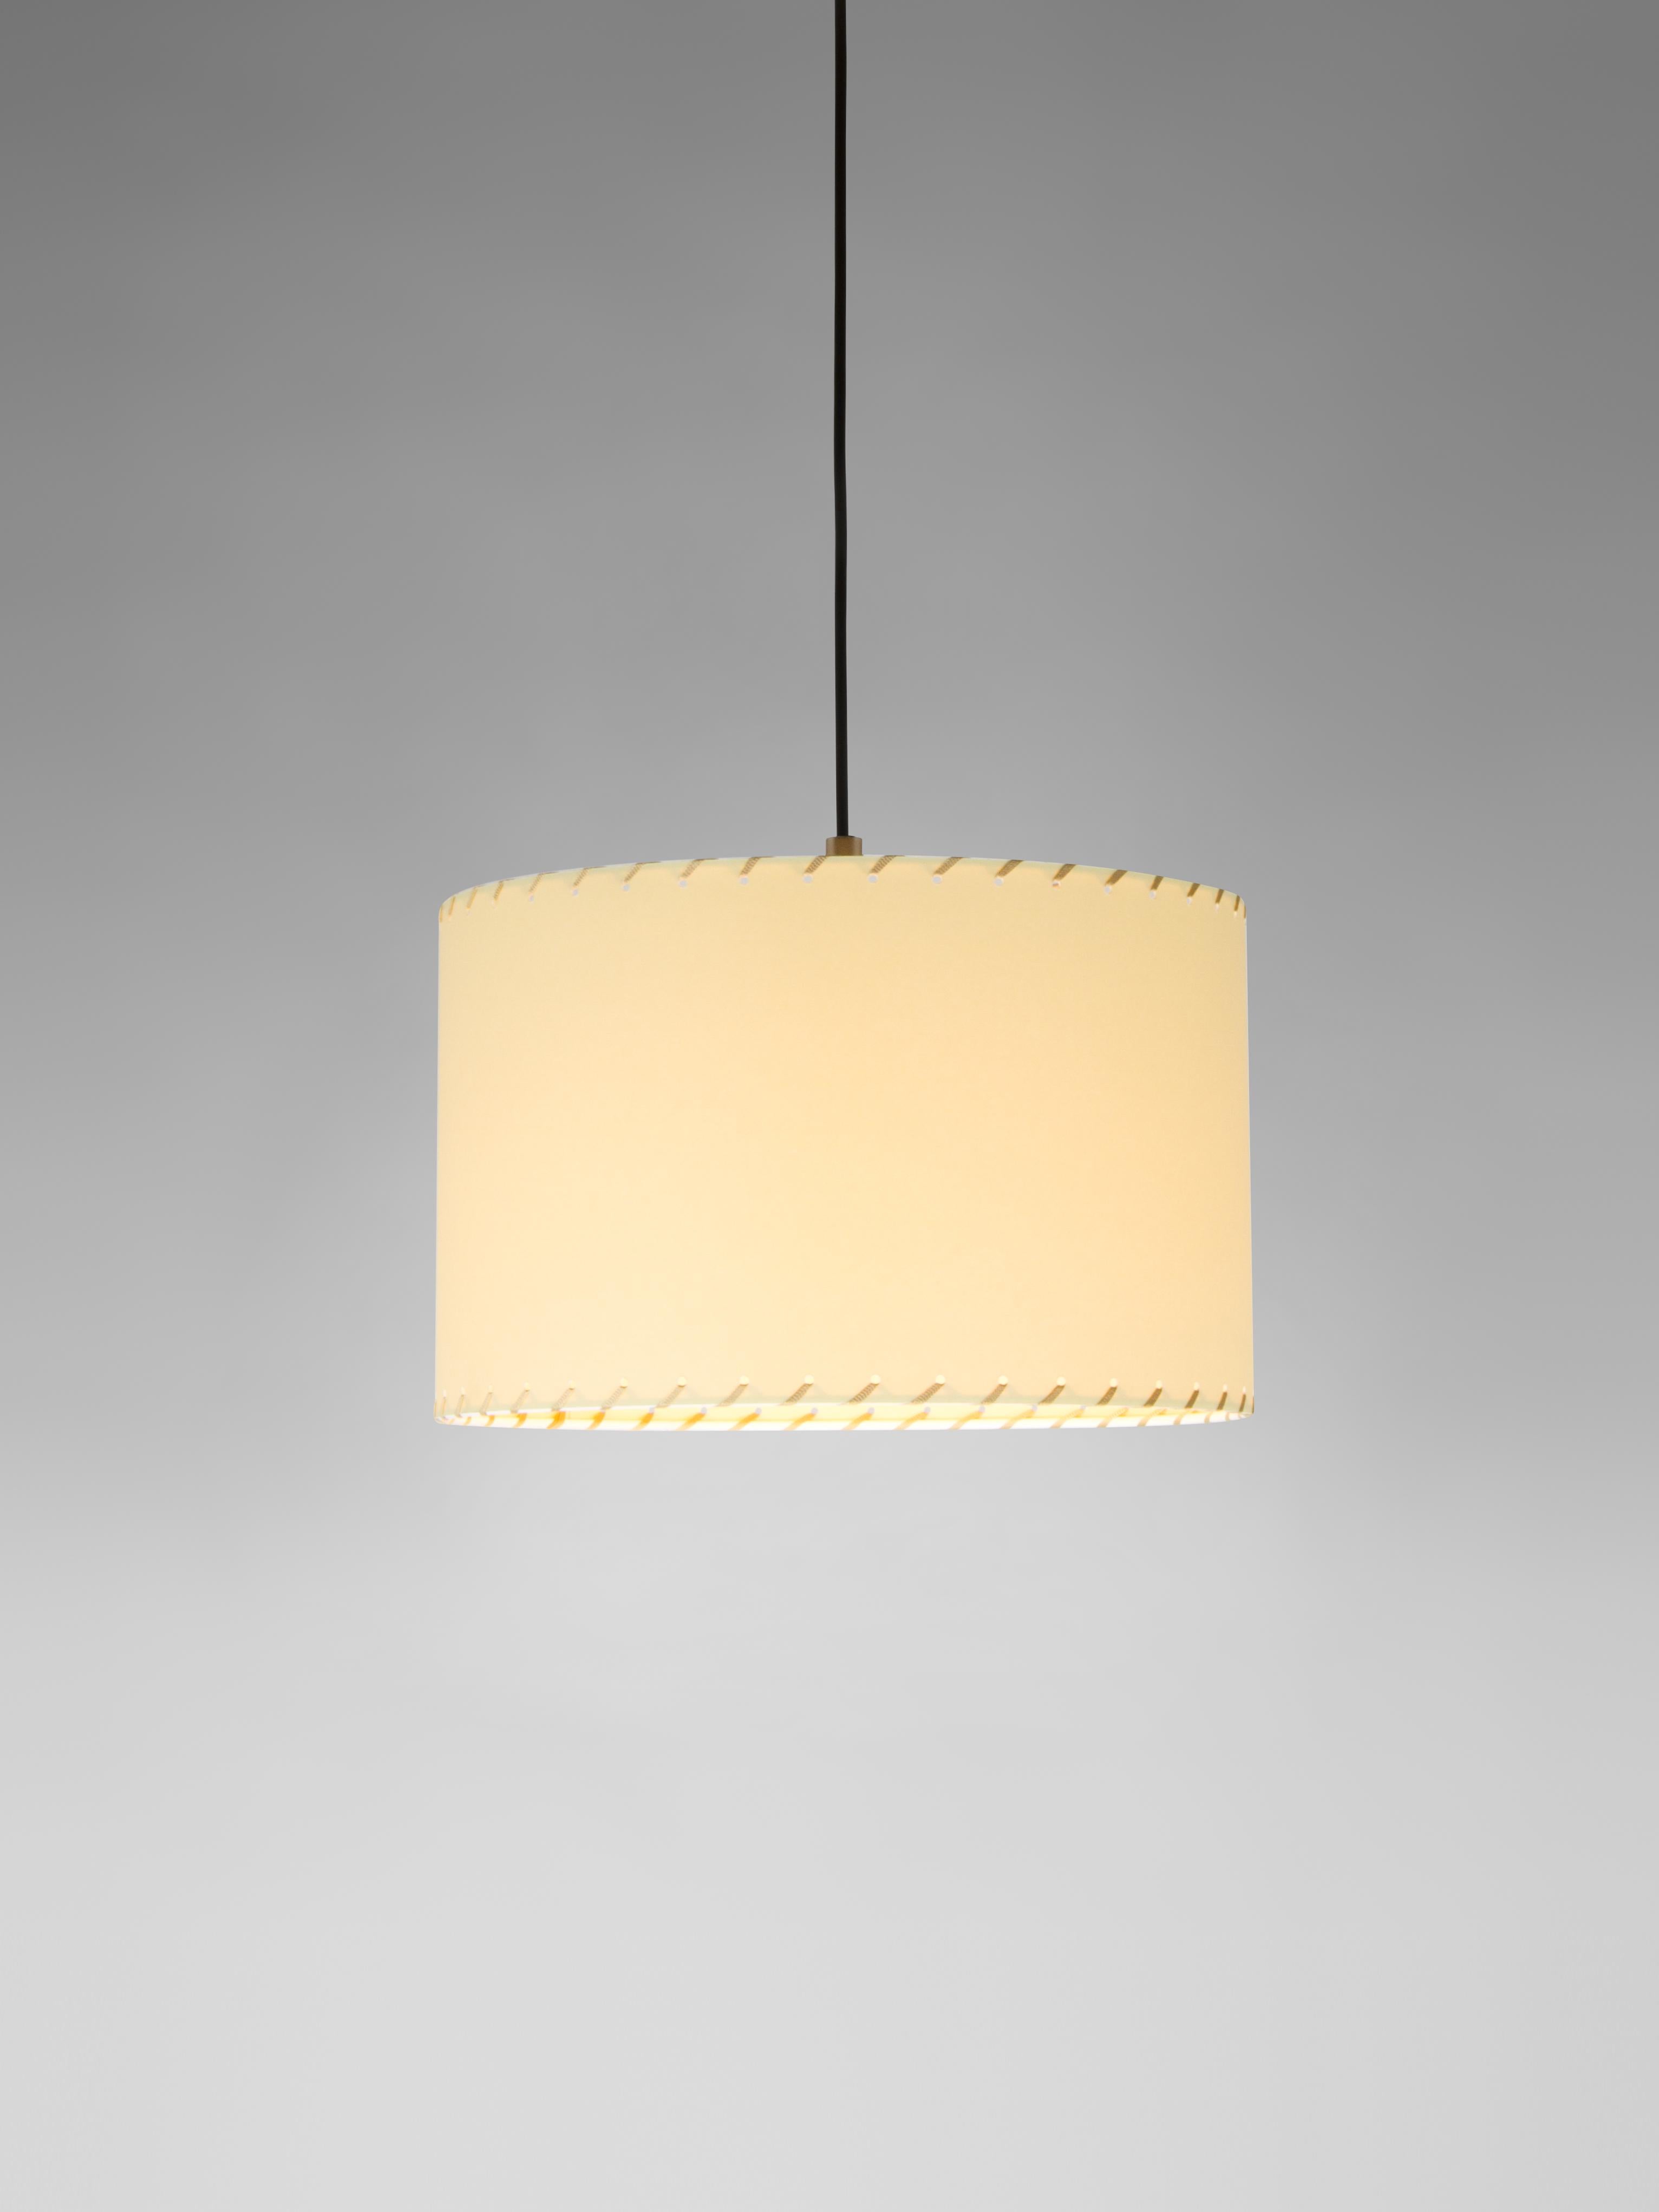 Beige Sísísí Cilíndricas PT2 pendant lamp by Santa & Cole
Dimensions: D 27 x H 17 cm
Materials: Metal, stitched parchment.
Available in stitched beige parchment or natural ribbon.

Cylindrical in shape, there are two sizes: the PT2 being the